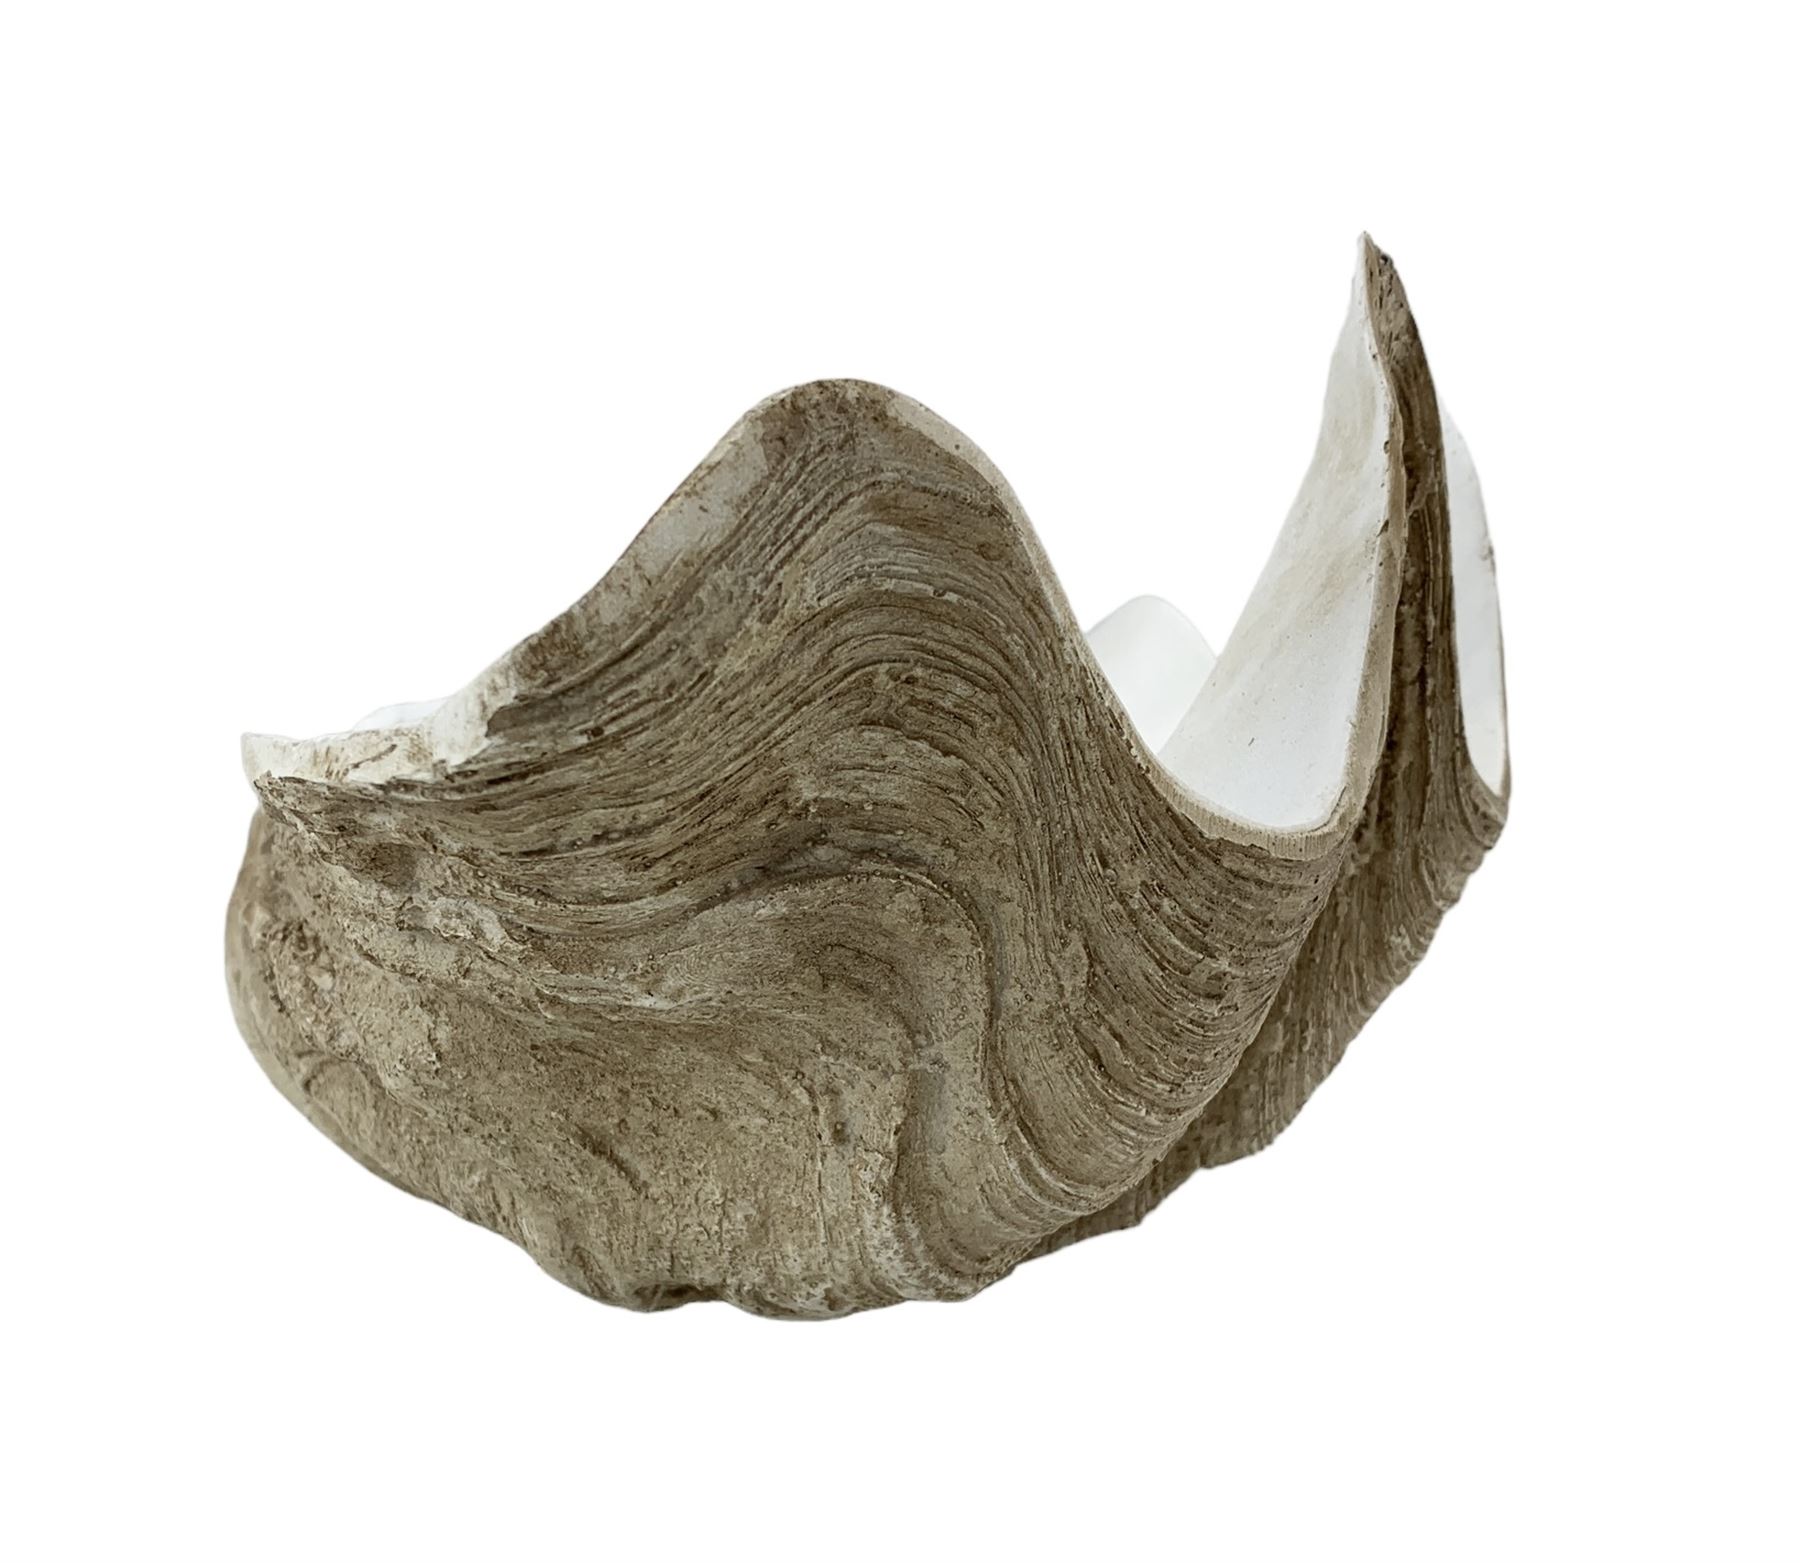 Large faux model of a clam shell - Image 3 of 3